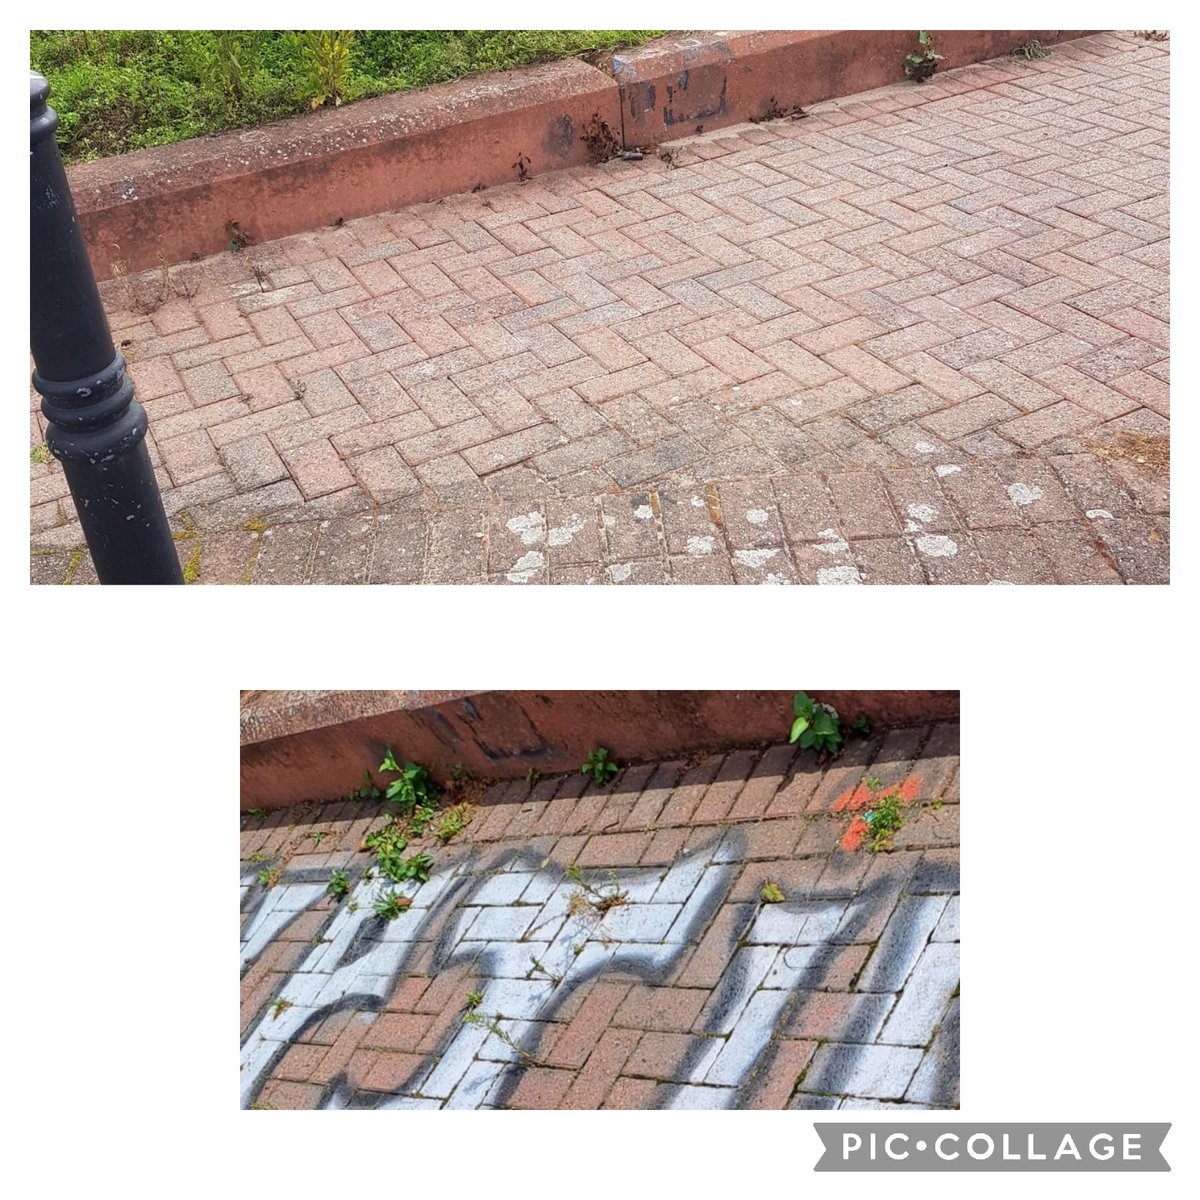 Really pleased to see the graffiti removed. Thanks   @LitterClear  for the joint walkabout looking at issues in the Crown & Grove Street area.
Thanks @lpool_LSSL team for removing the graffiti. We achieve more working together @lpoolcouncil #Loveourcommunity